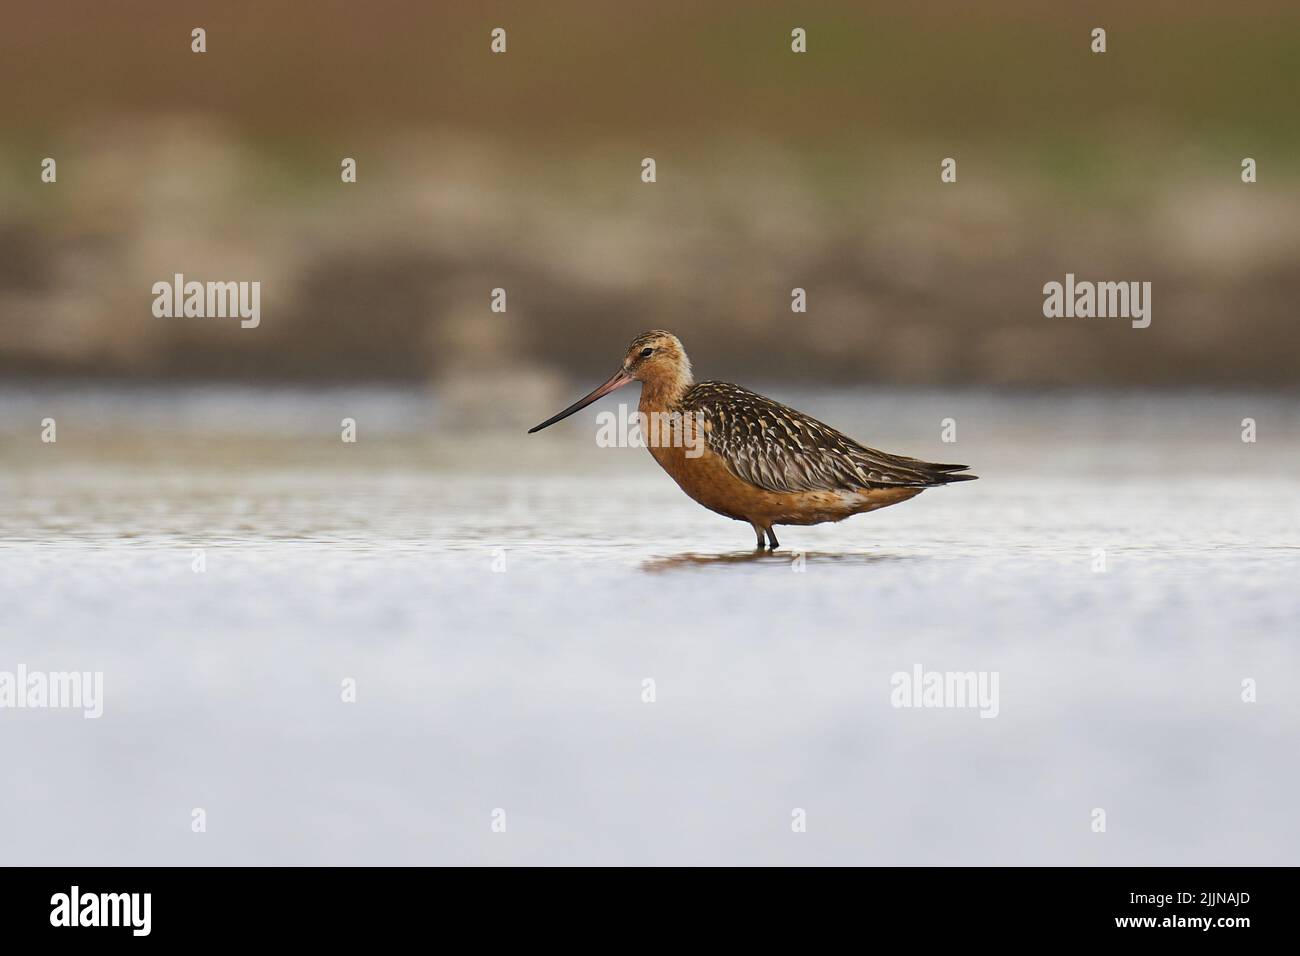 Bar-tailed godwit (Limosa lapponica) in its natural enviroment Stock Photo